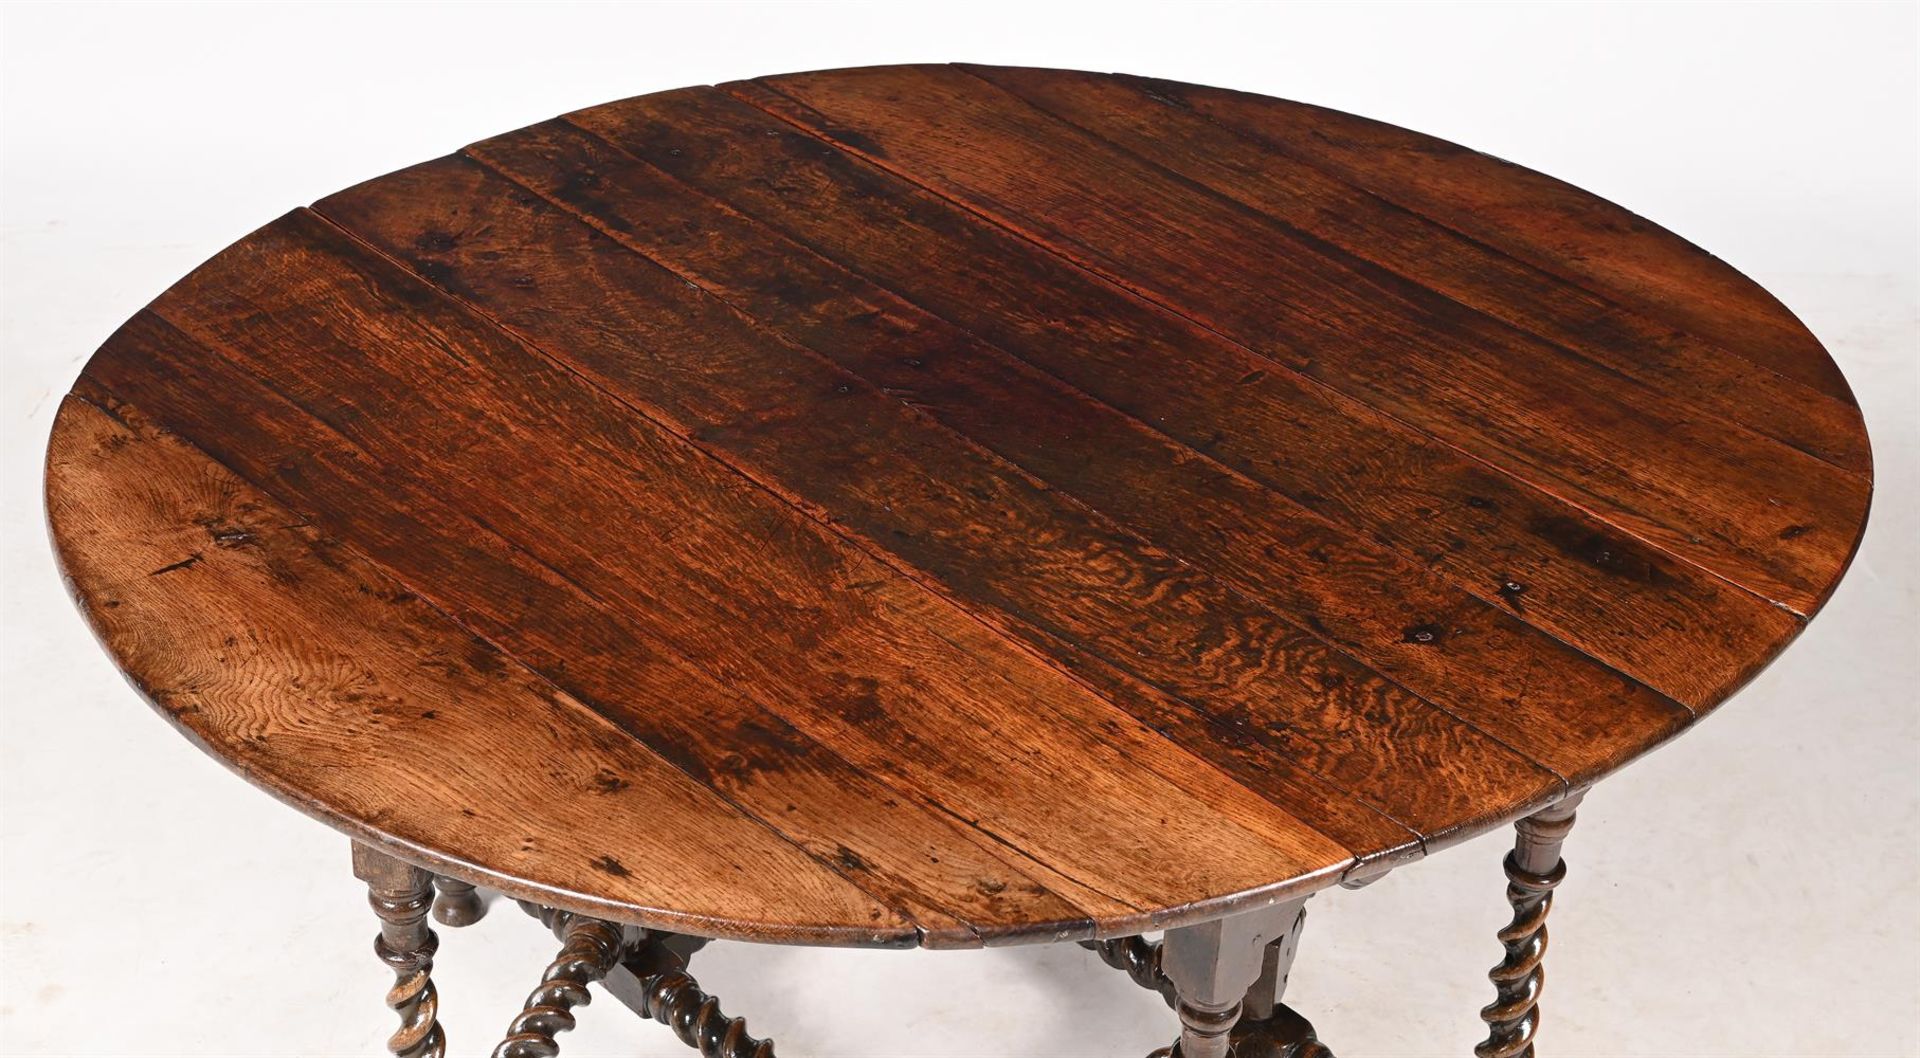 A LARGE OAK GATELEG DINING TABLE FIRST HALF, 18TH CENTURY - Image 3 of 3